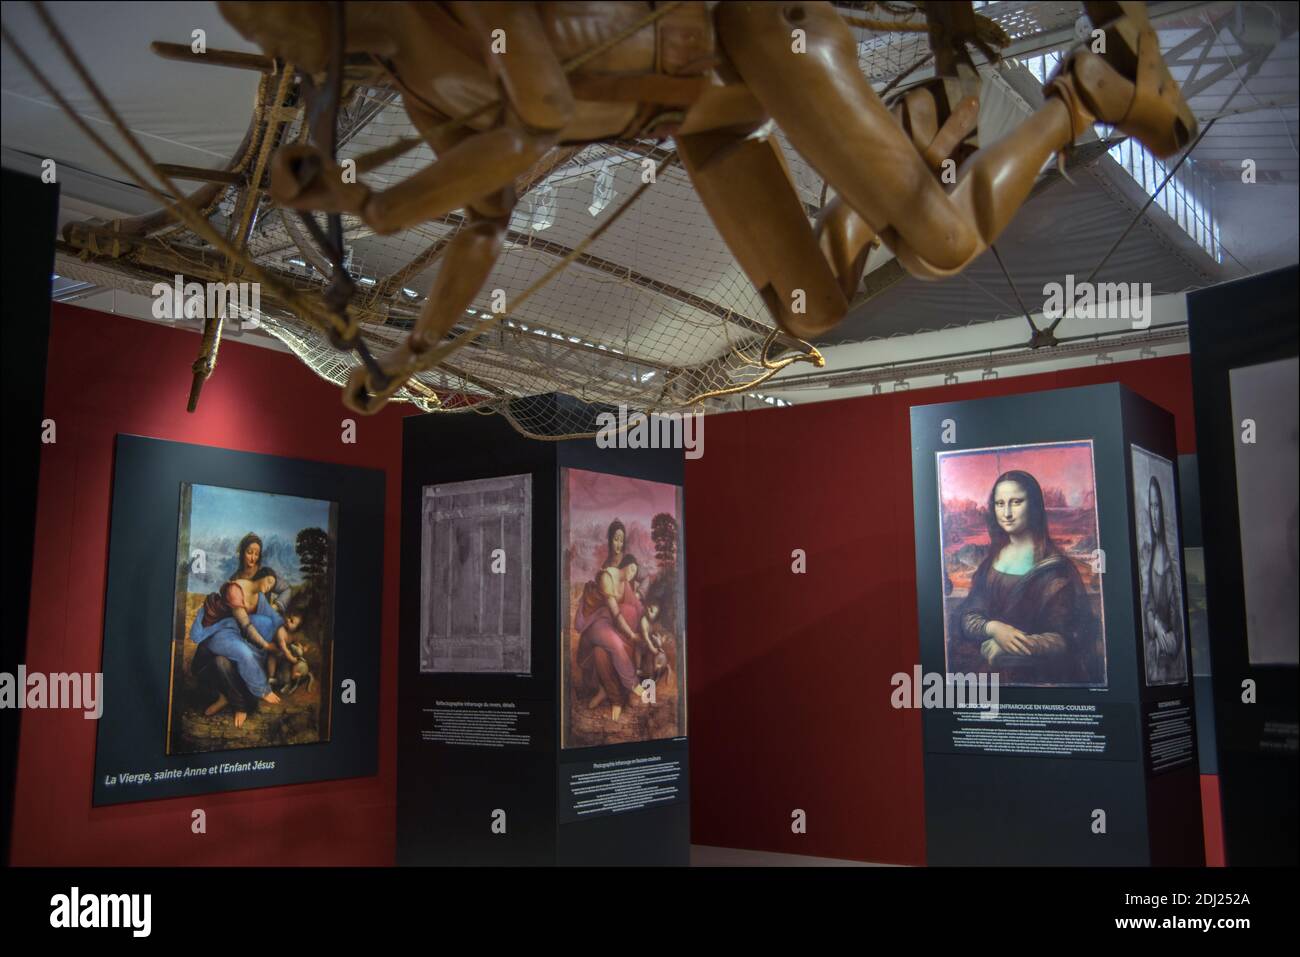 500th anniversary of Leonardo da Vinci’s arrival at the Château du Clos Luce, celebrate with an exhibition in Amboise, France, on June 17, 2016. After François Ist’s invitation, Leonardo da Vinci settles in Amboise during the autumn of 1516. Aged 64 years old, he crossed the Alps with two disciples, Francesco Melzi and his faithful Milanese servant Batista de Vilanis. He lived and worked there until his death, in his Clos Luce’s room on May 2nd, 1519. This exhibition aims to remind and to highlight the five-centenary (1516- 2016) of a crucial episode in Leonardo da Vinci’s life: the savant art Stock Photo